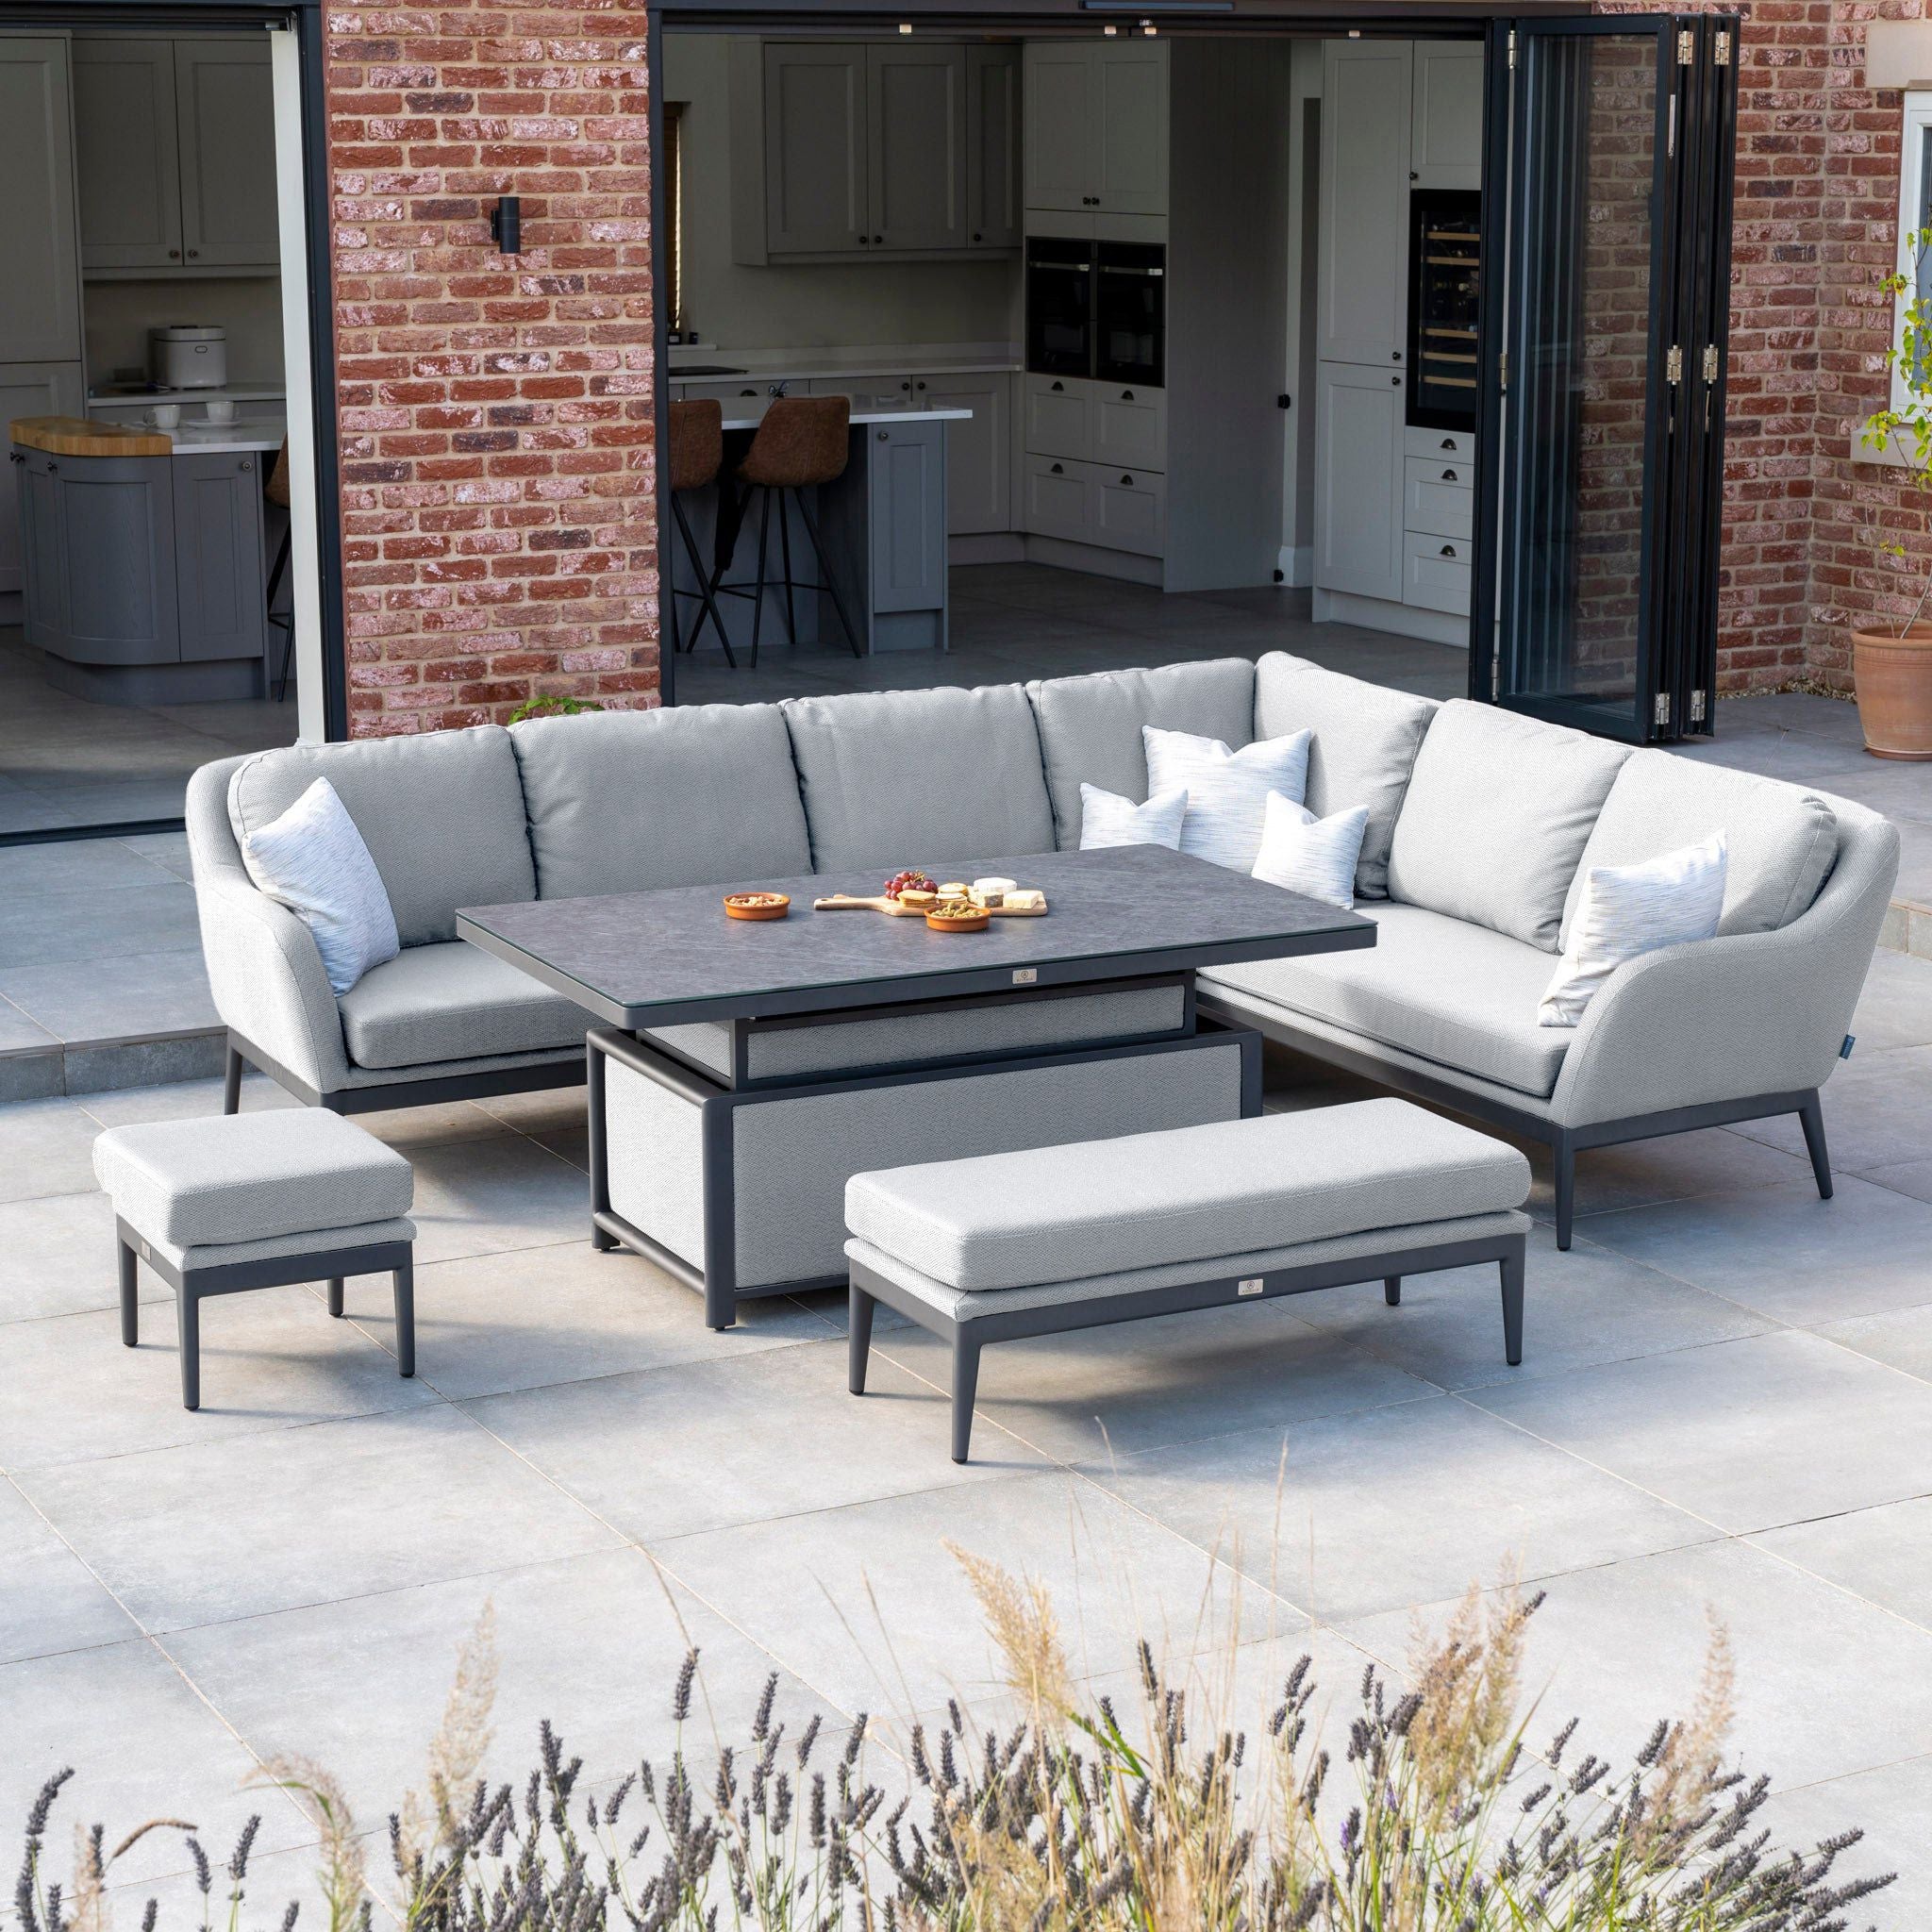 Luna Outdoor Fabric Rectangular Corner Dining Set with Rising Table in Oyster Grey (Right Hand)